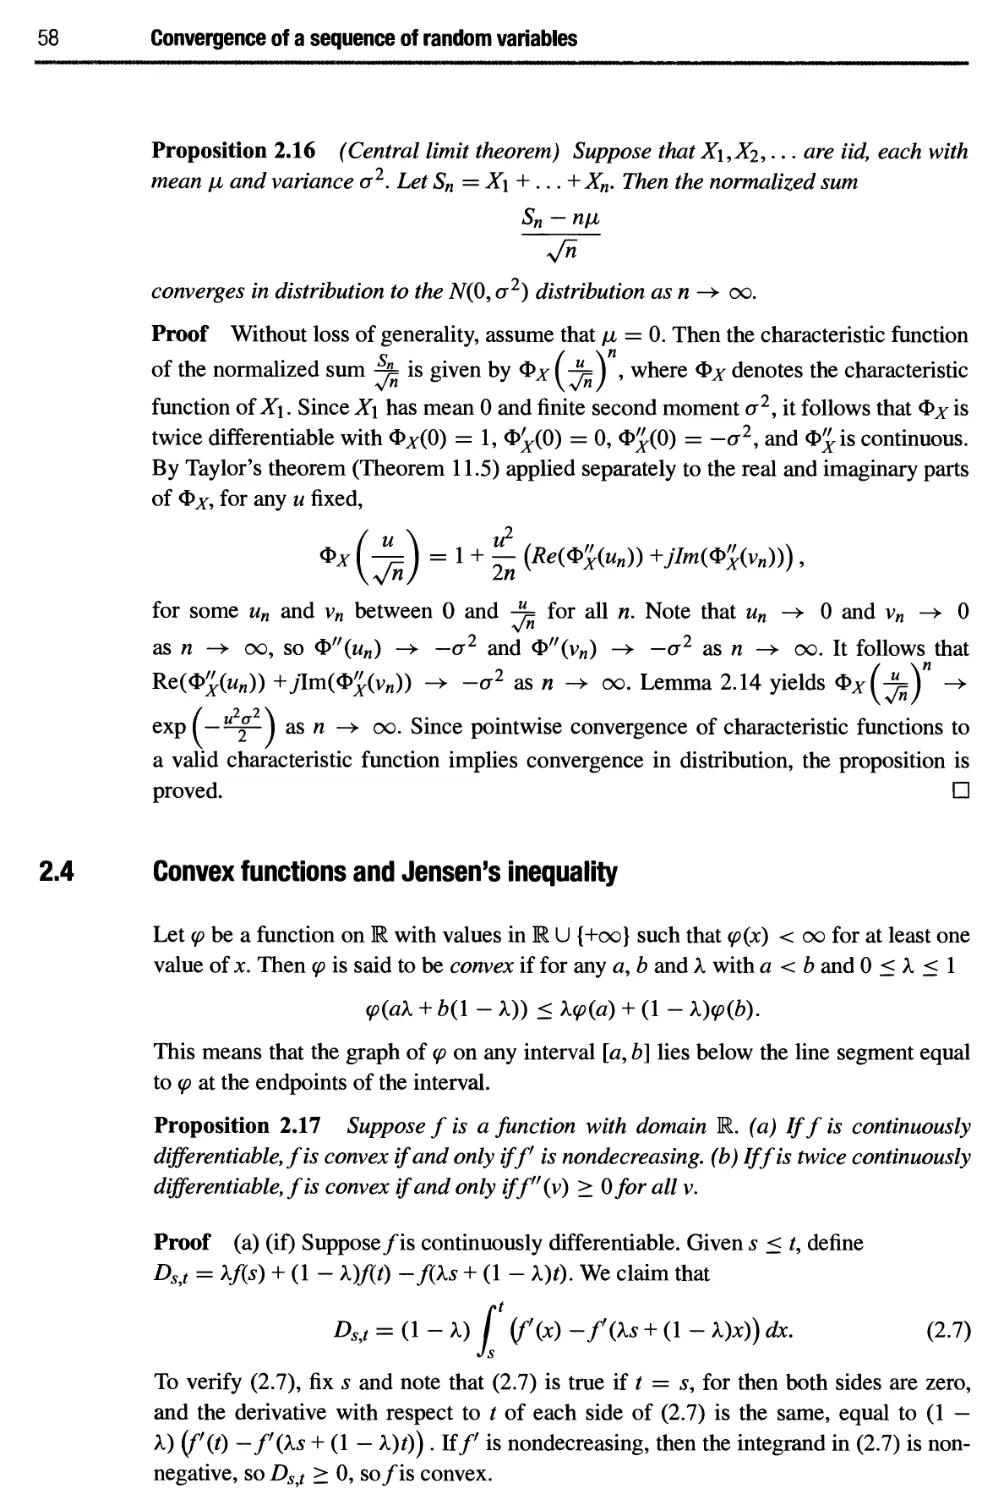 2.4 Convex functions and Jensen’s inequality 58